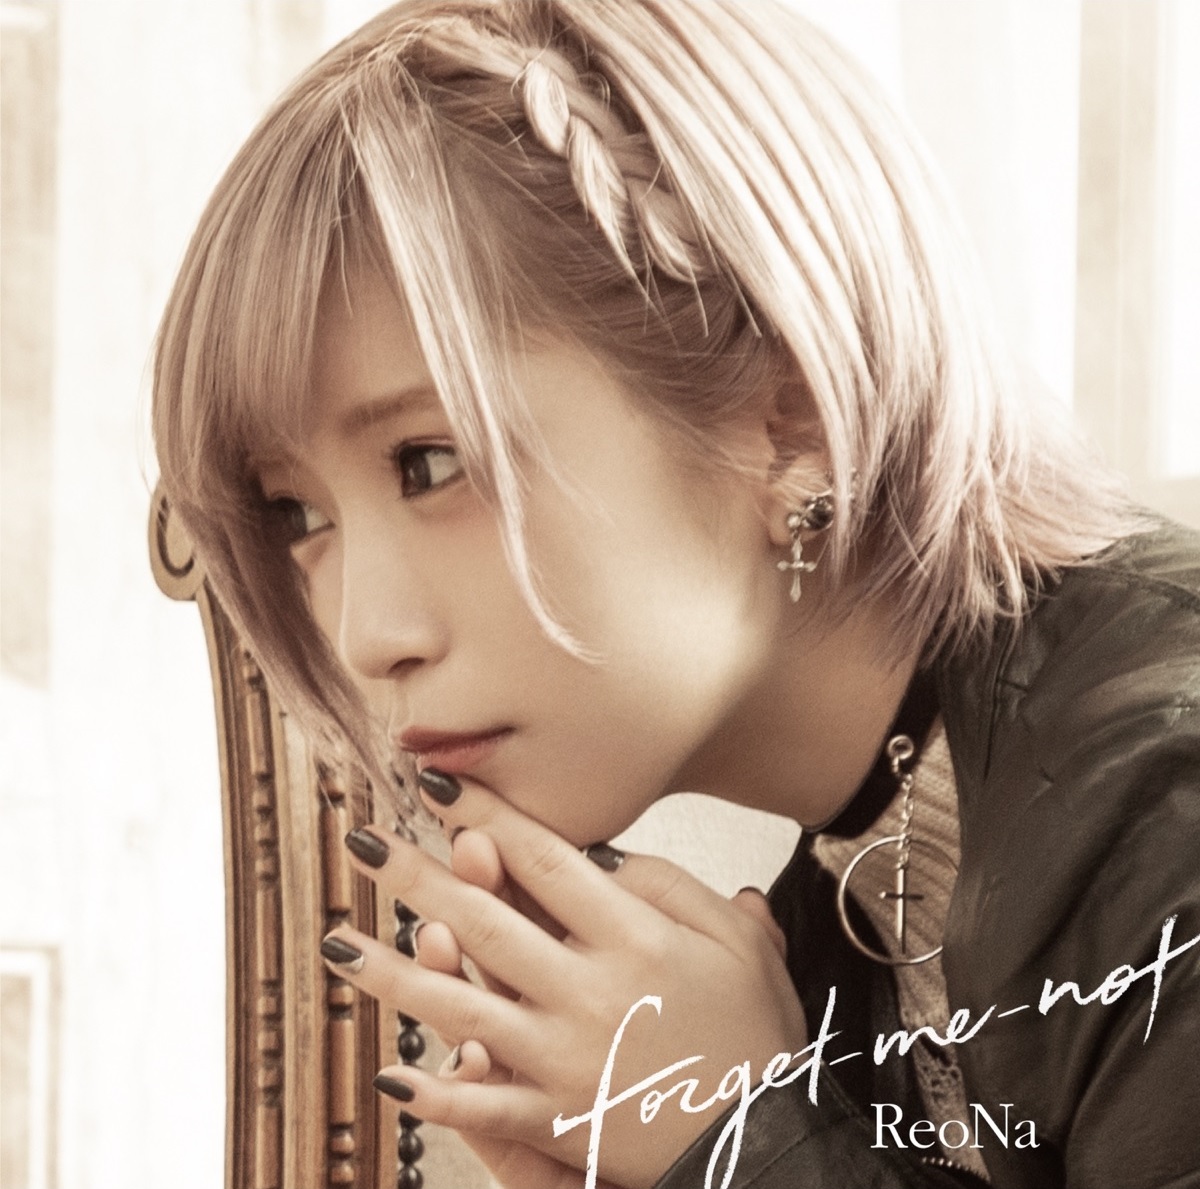 『ReoNa - forget-me-not 歌詞』収録の『forget-me-not』ジャケット